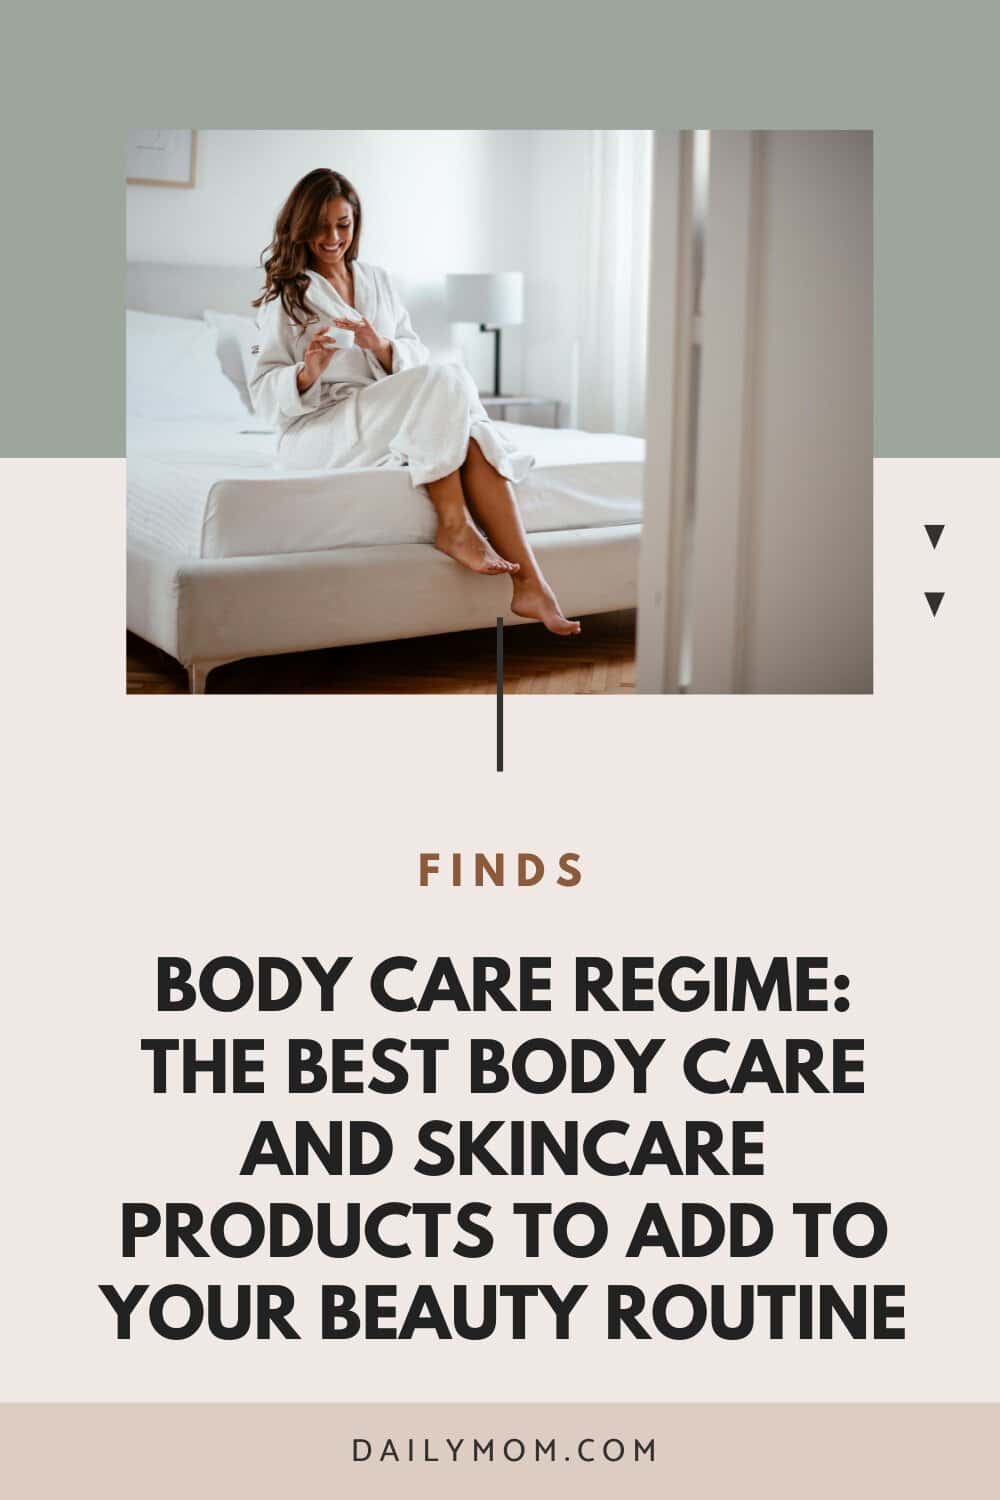 Body Care Regime: The Best Body Care And Skin Care Products To Add To Your Beauty Routine 41 Daily Mom, Magazine For Families